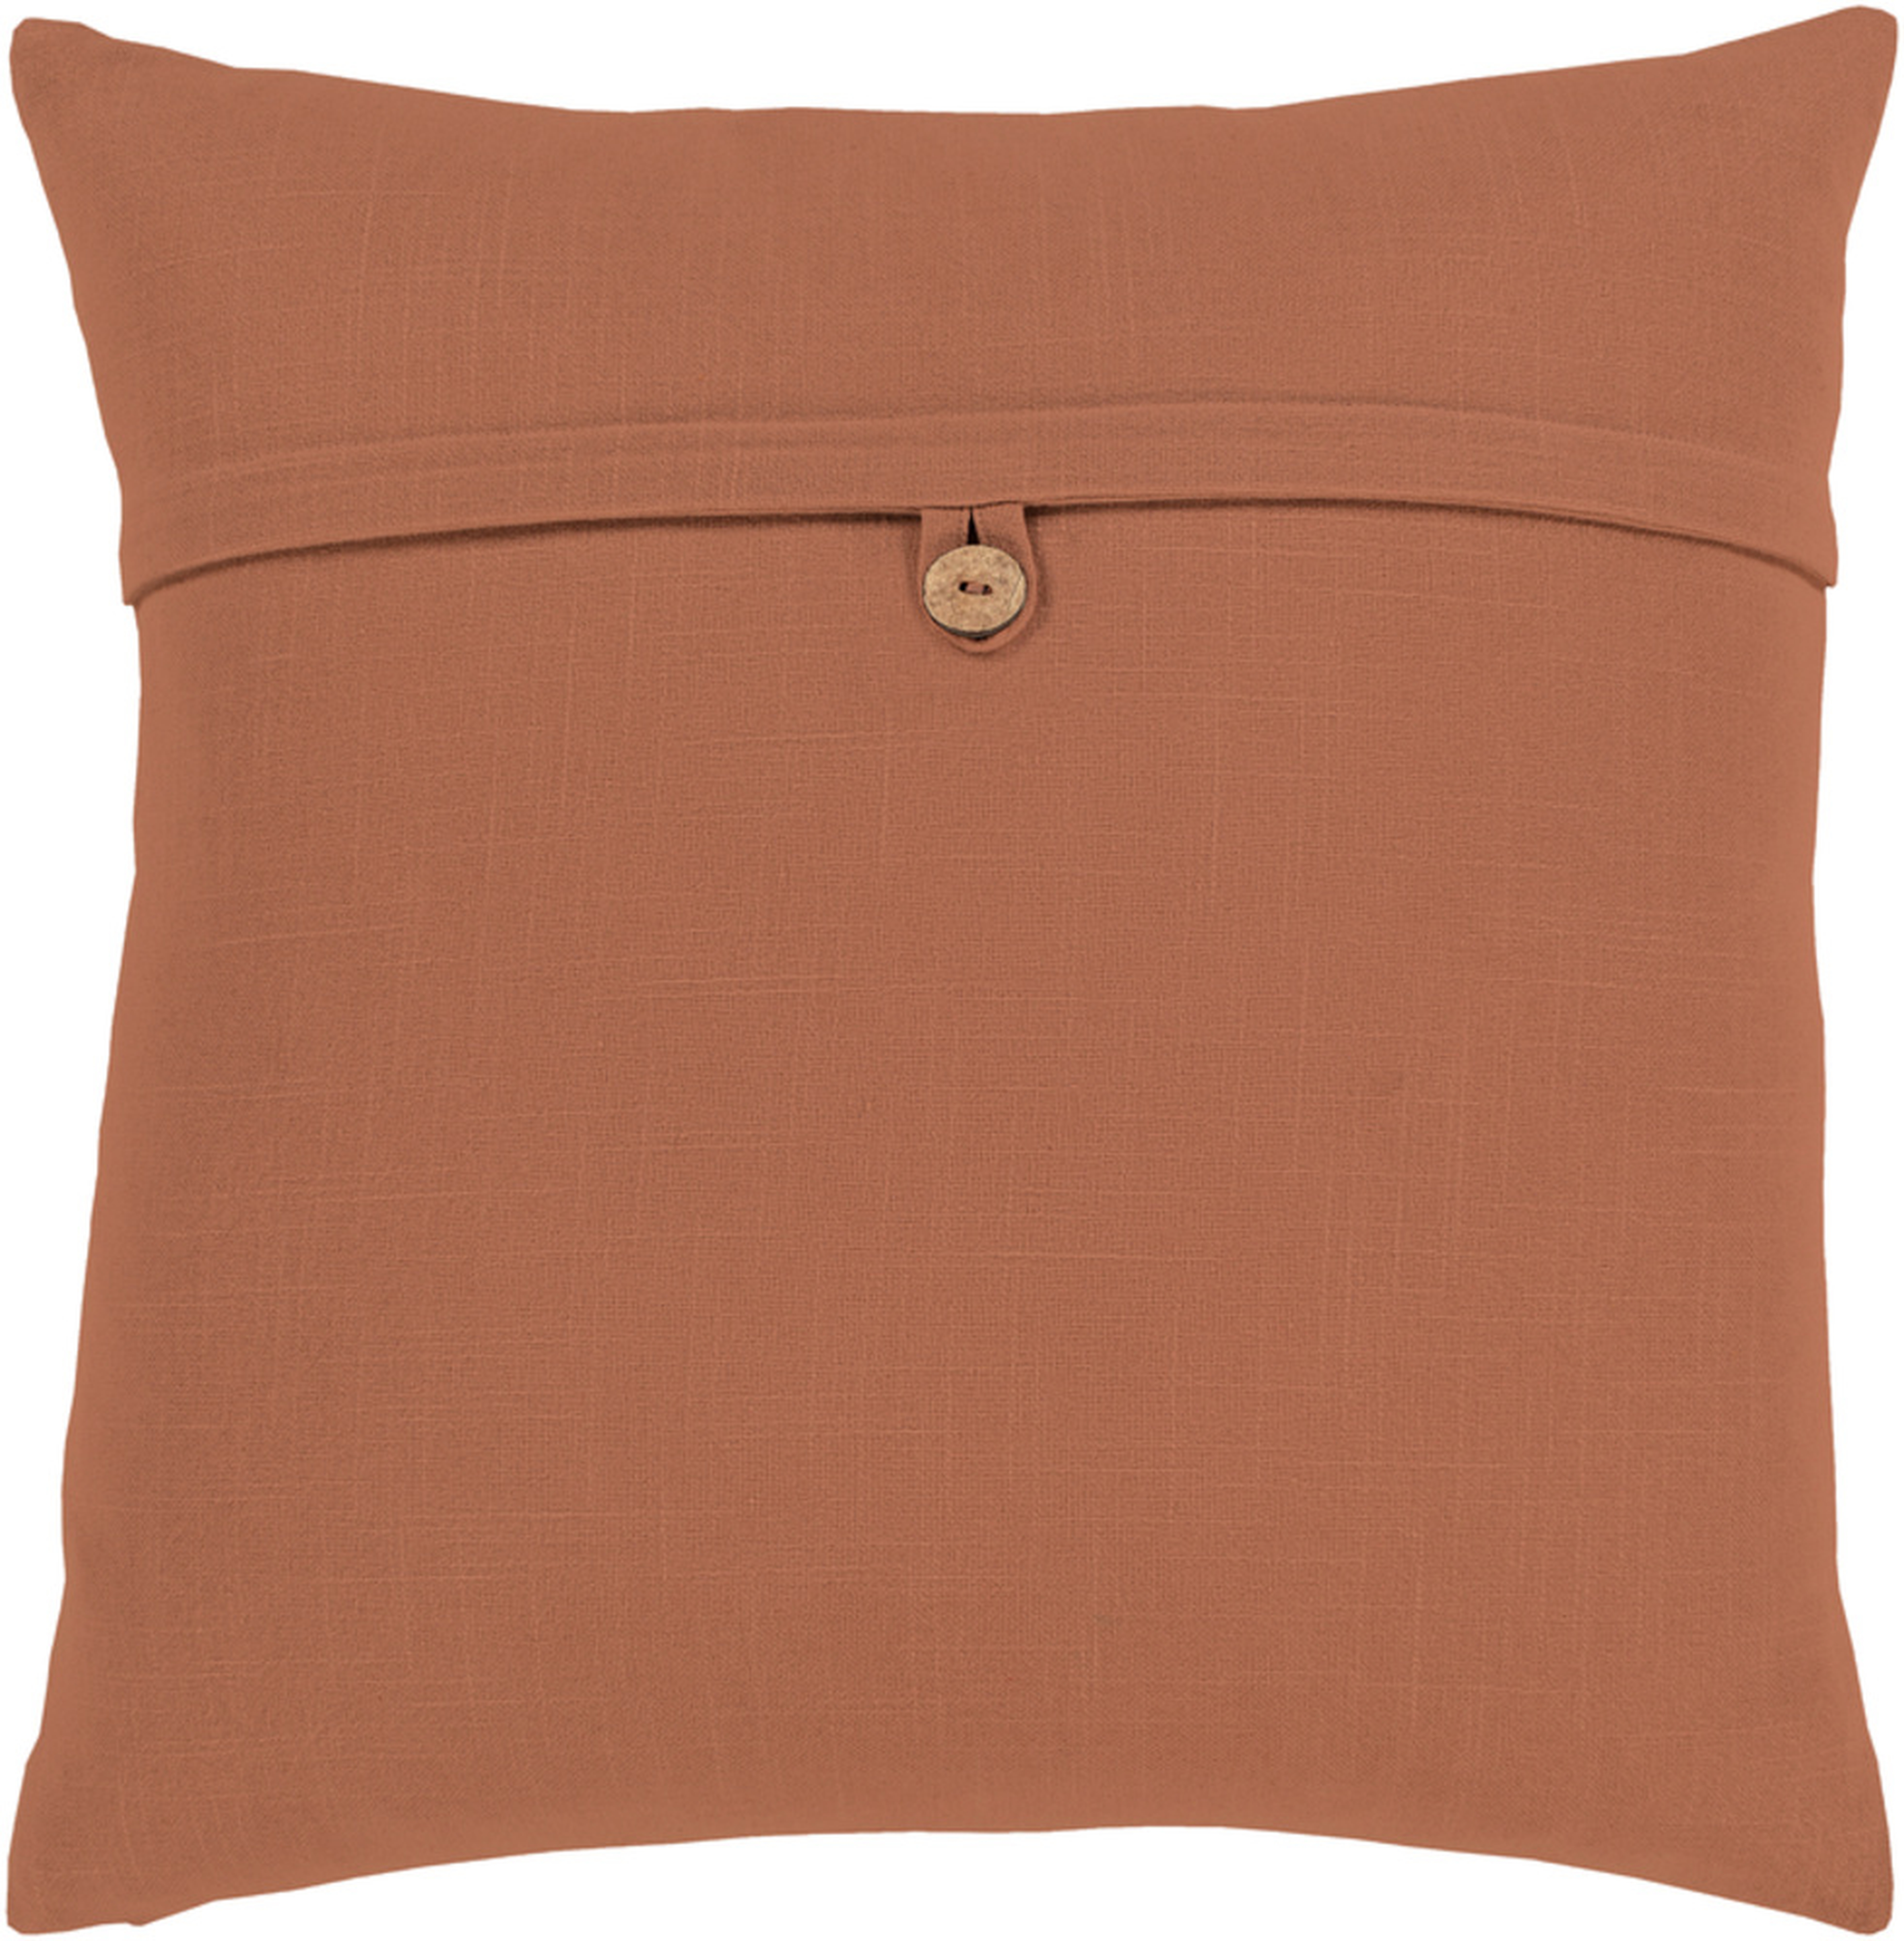 Perine Pillow Cover, 20" x 20", Camel - Cove Goods